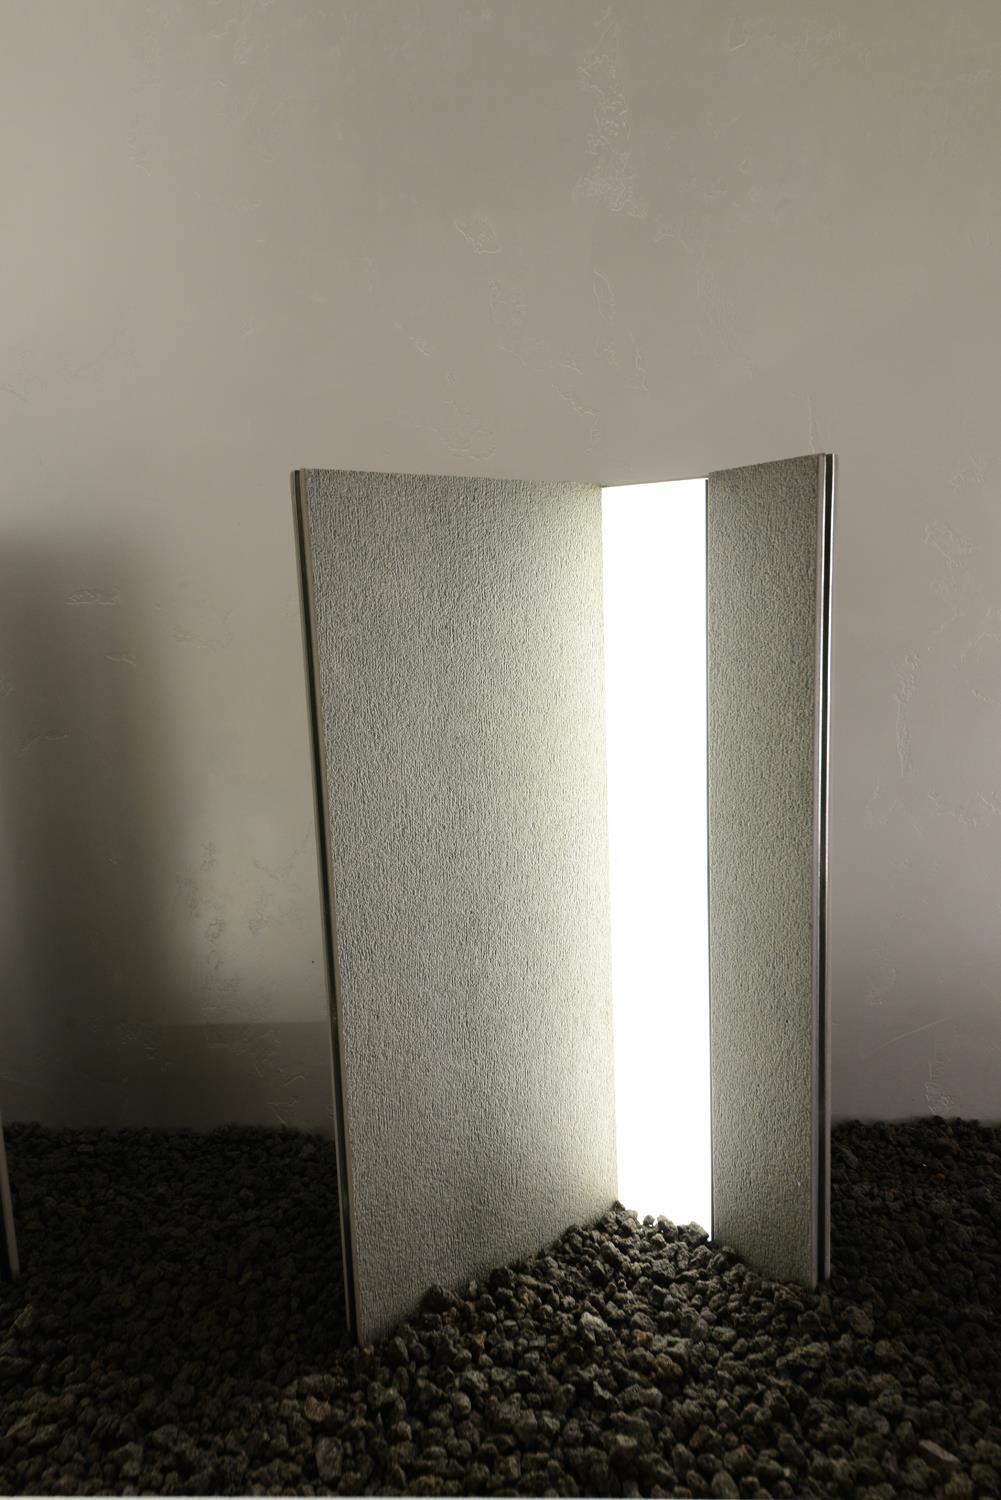 Cotto D'Este announces the winners of "KERLIGHT - Design your light with Kerlite": Photo 2